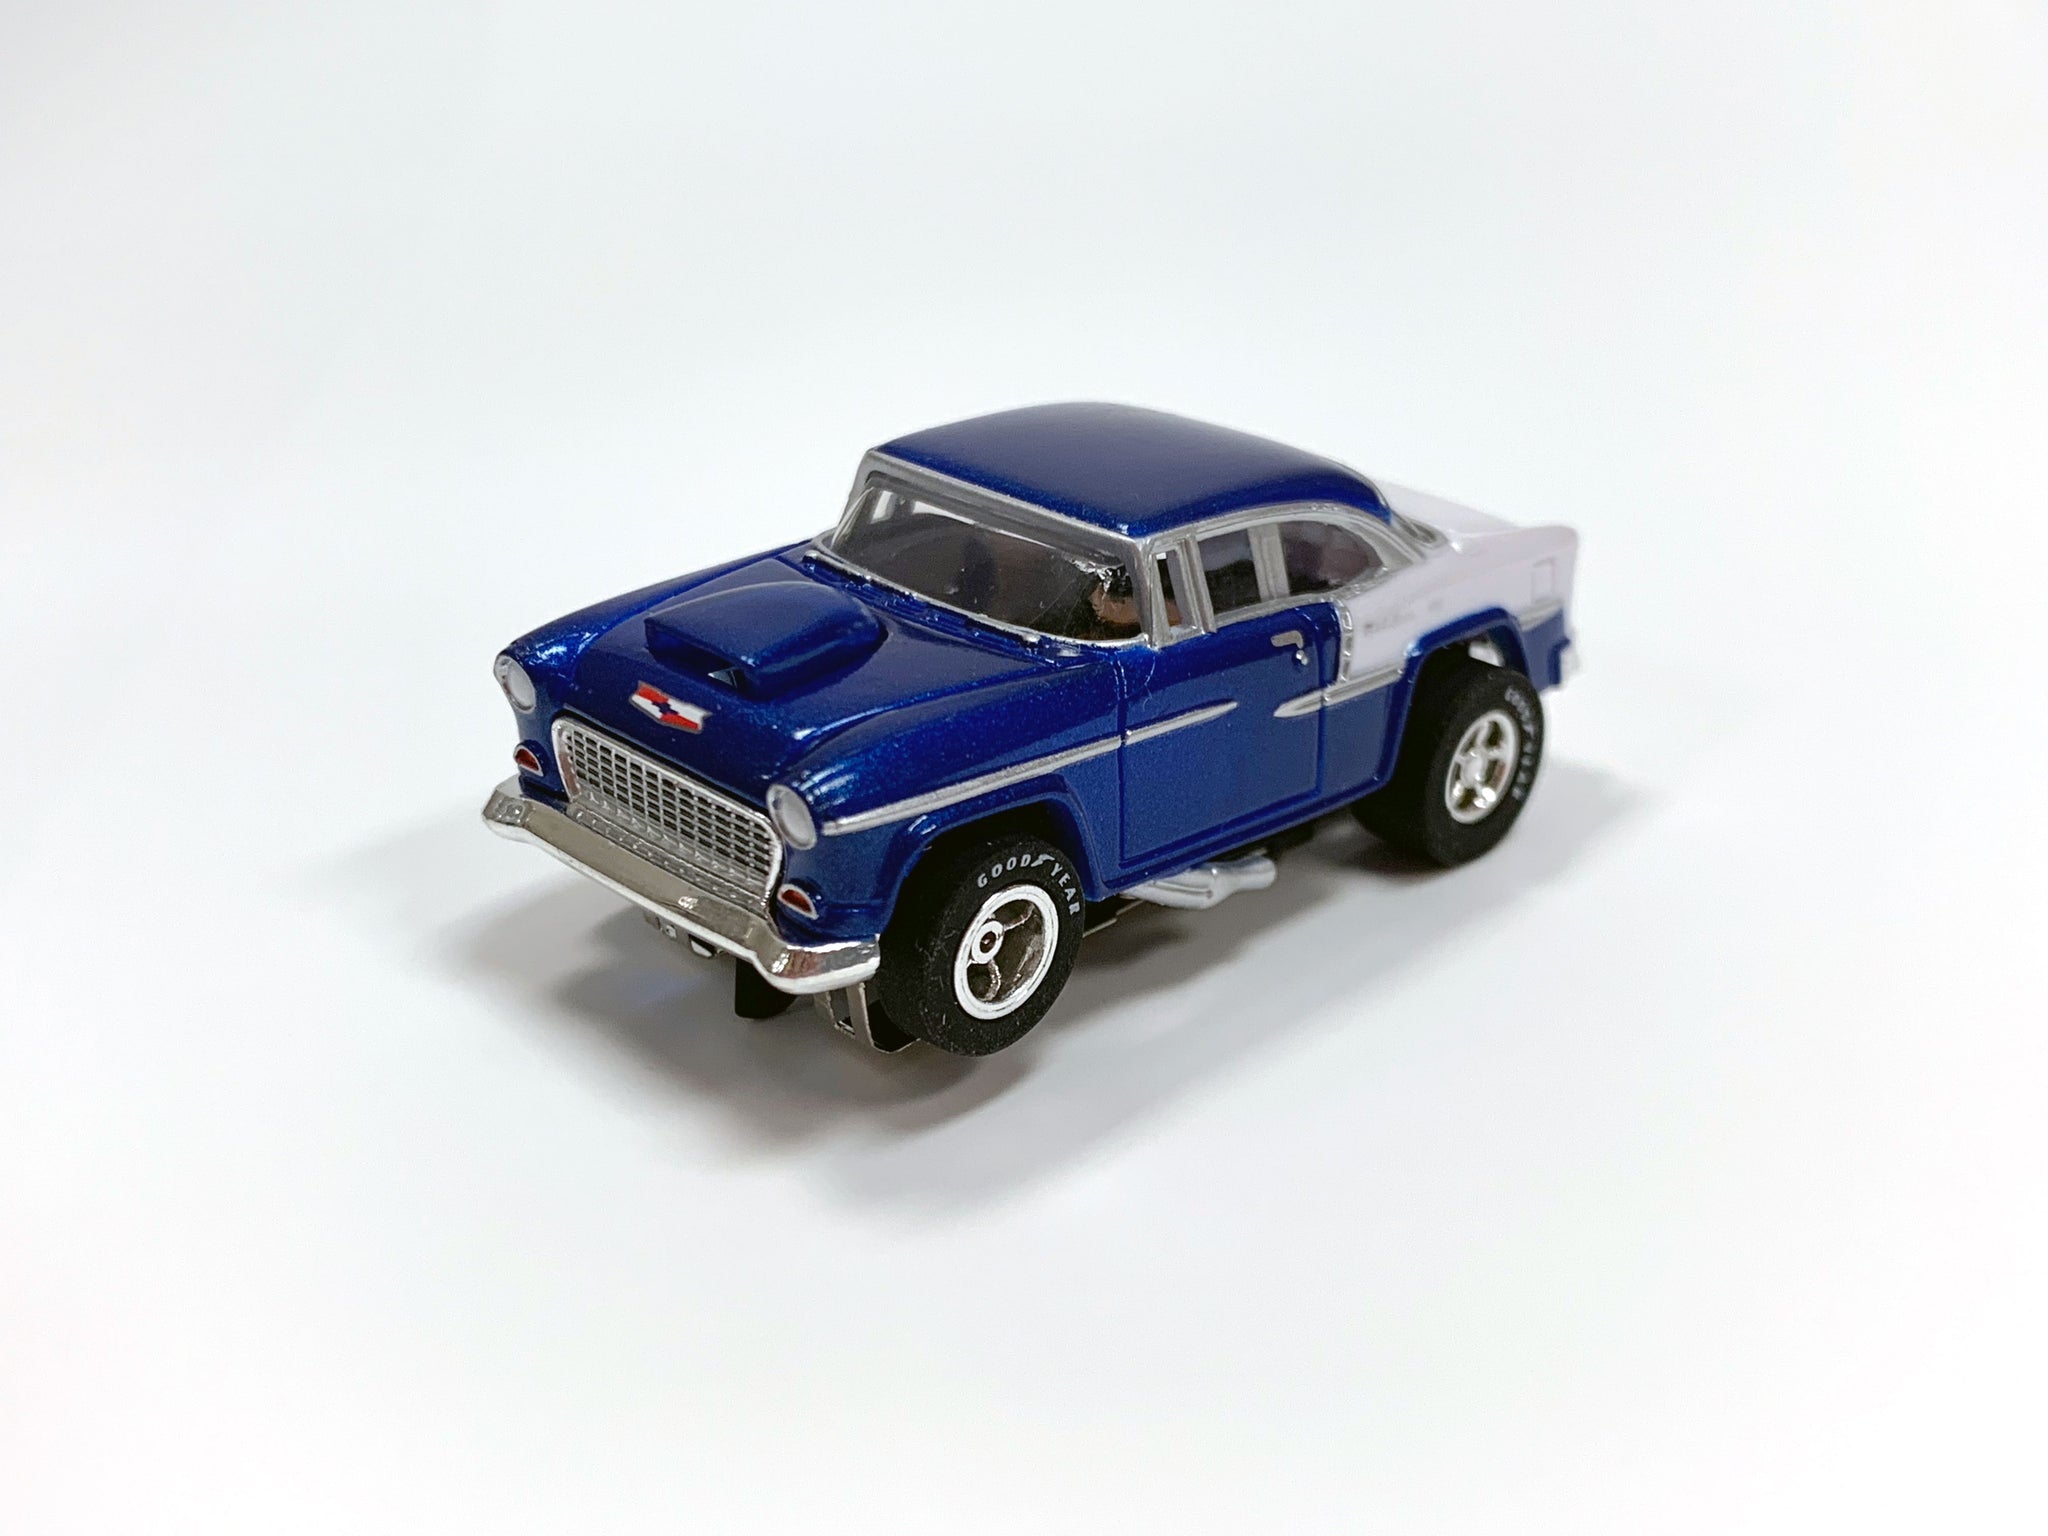 Classic Blue & White | 1955 Chevrolet Nomad and Bel Air box set